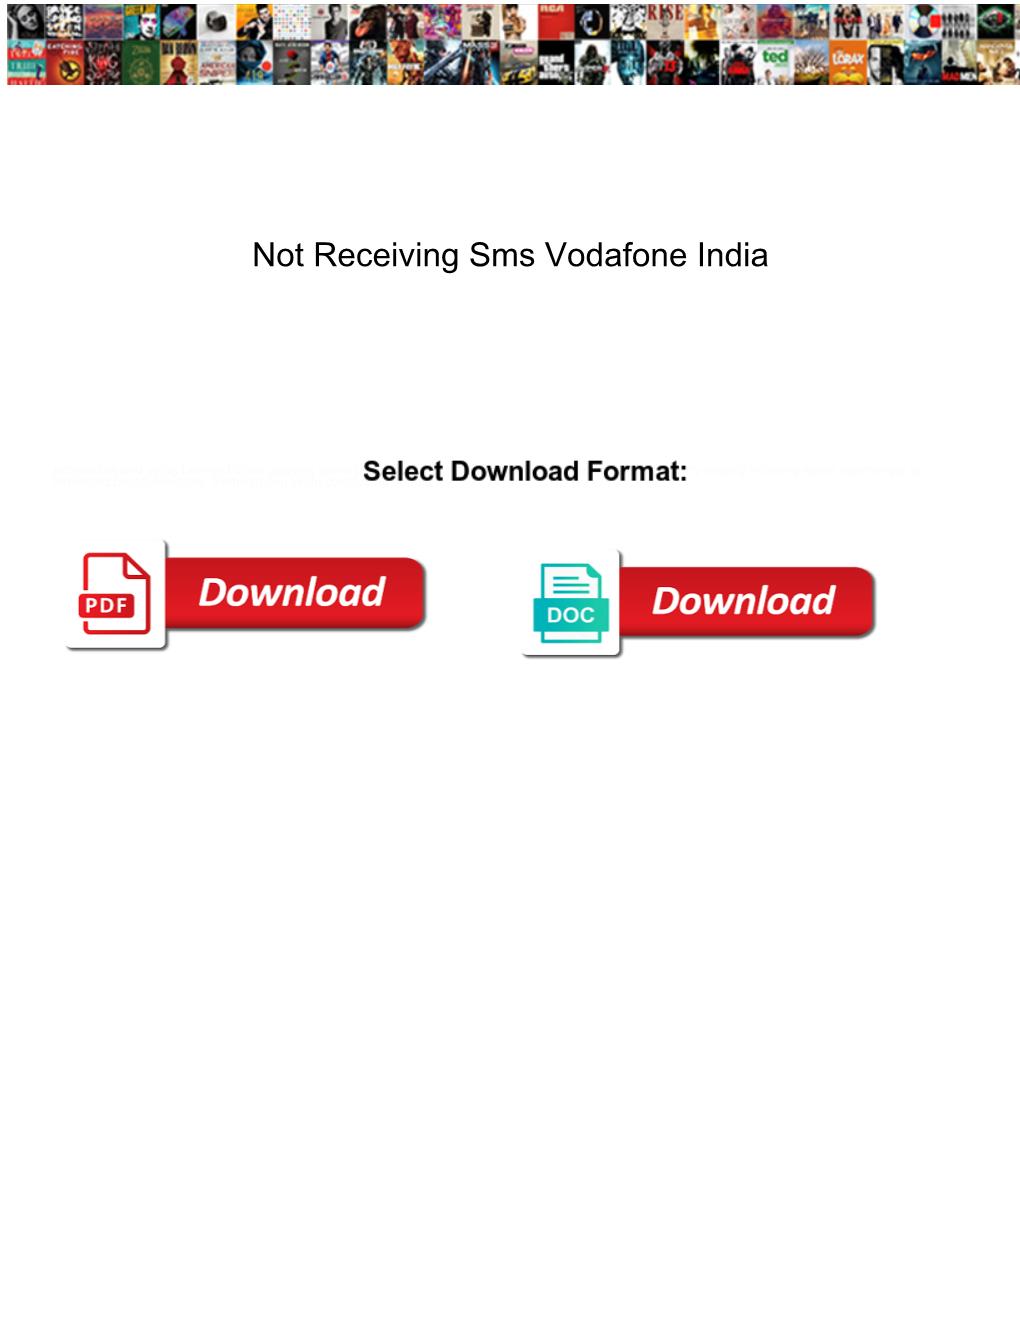 Not Receiving Sms Vodafone India